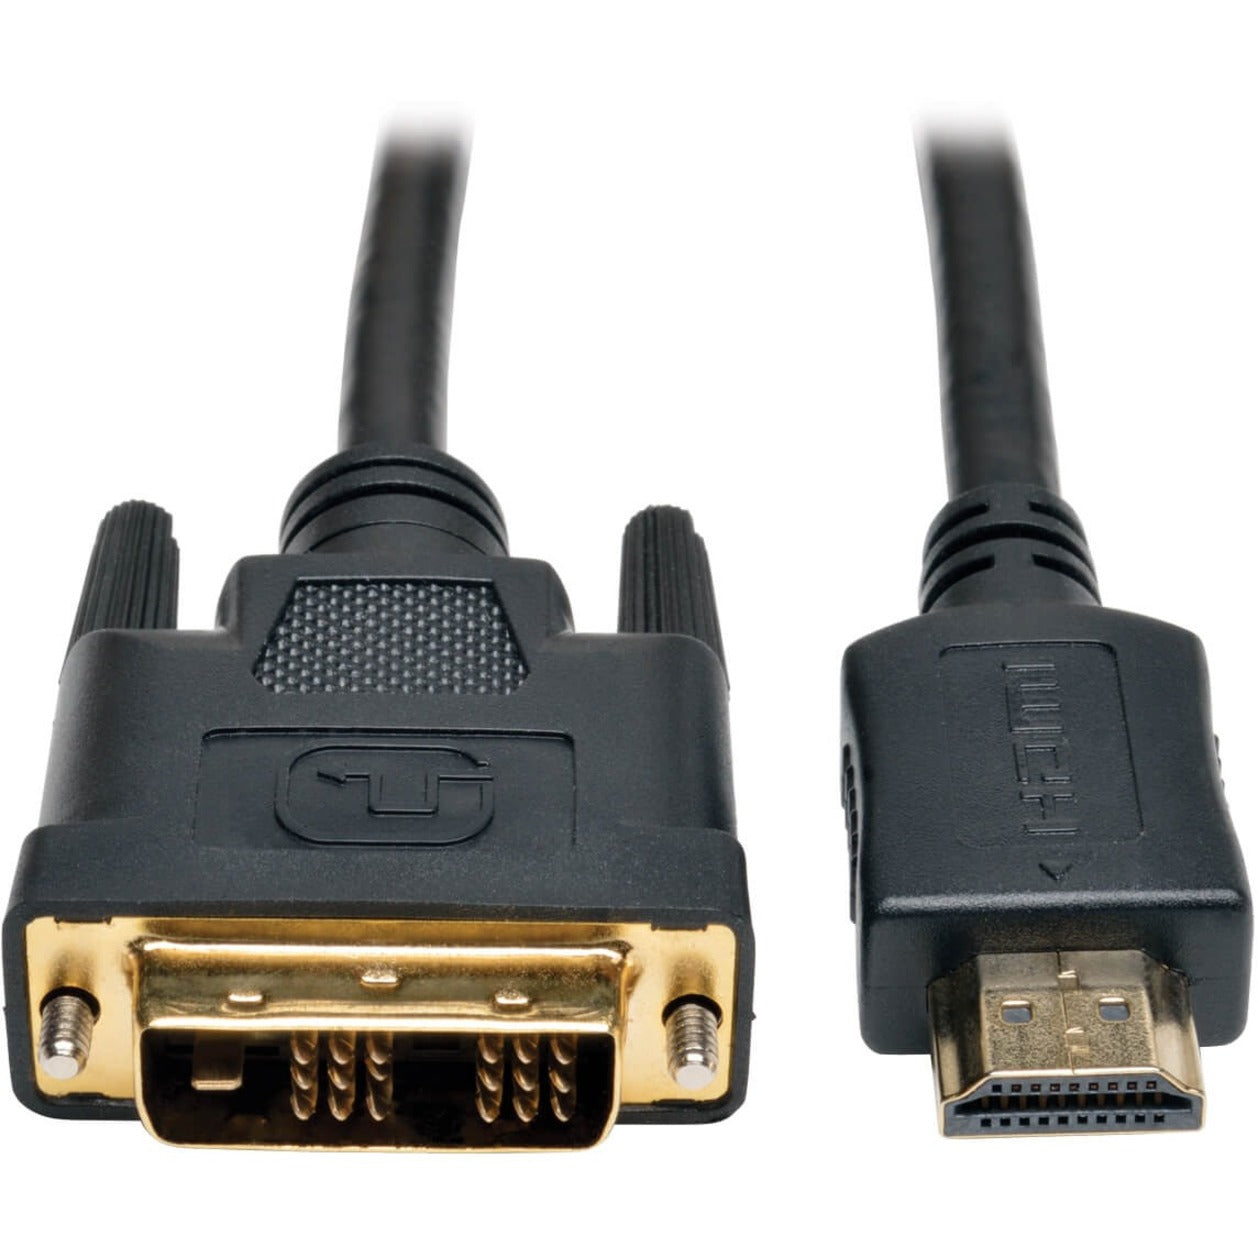 Tripp Lite P566-016 Gold Digital Video Cable, 16 ft HDMI to DVI, Crosstalk Protection, EMI/RF Protection